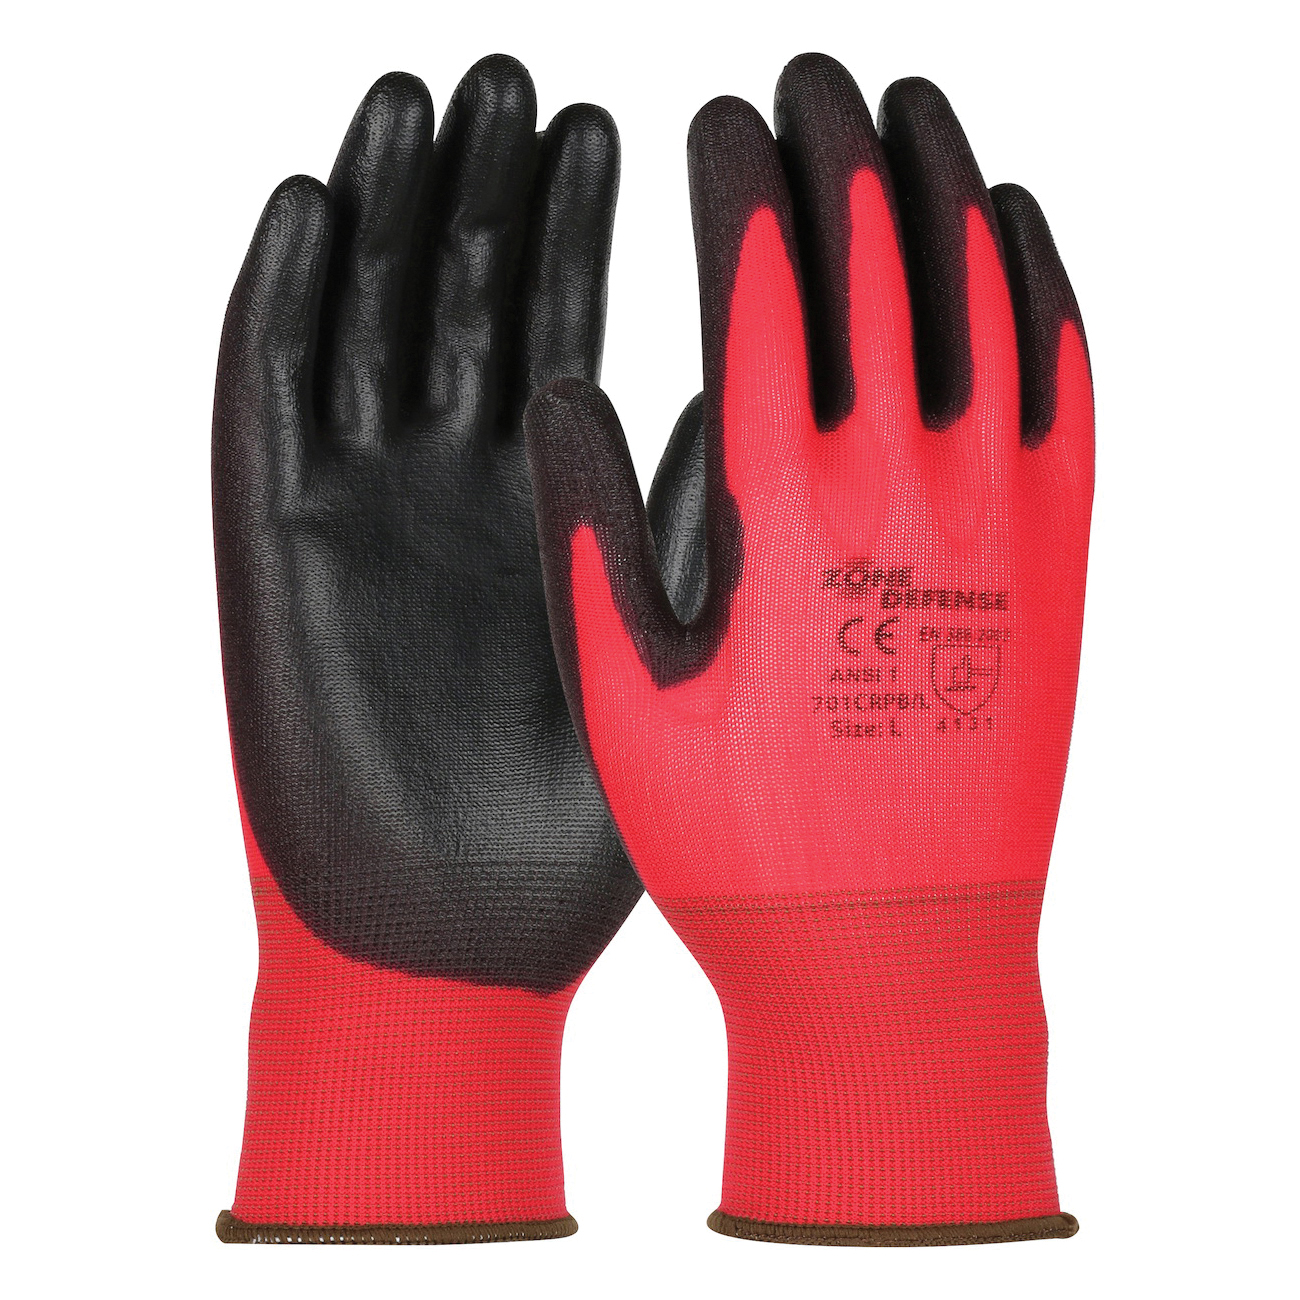 PIP® 701CRPB/M Unisex General Purpose Gloves, Coated/Work, Seamless Style, M, Polyurethane Palm, Nylon, Black/Red, Ribbed Knit Wrist Cuff, Polyurethane Coating, Resists: Cut and Puncture